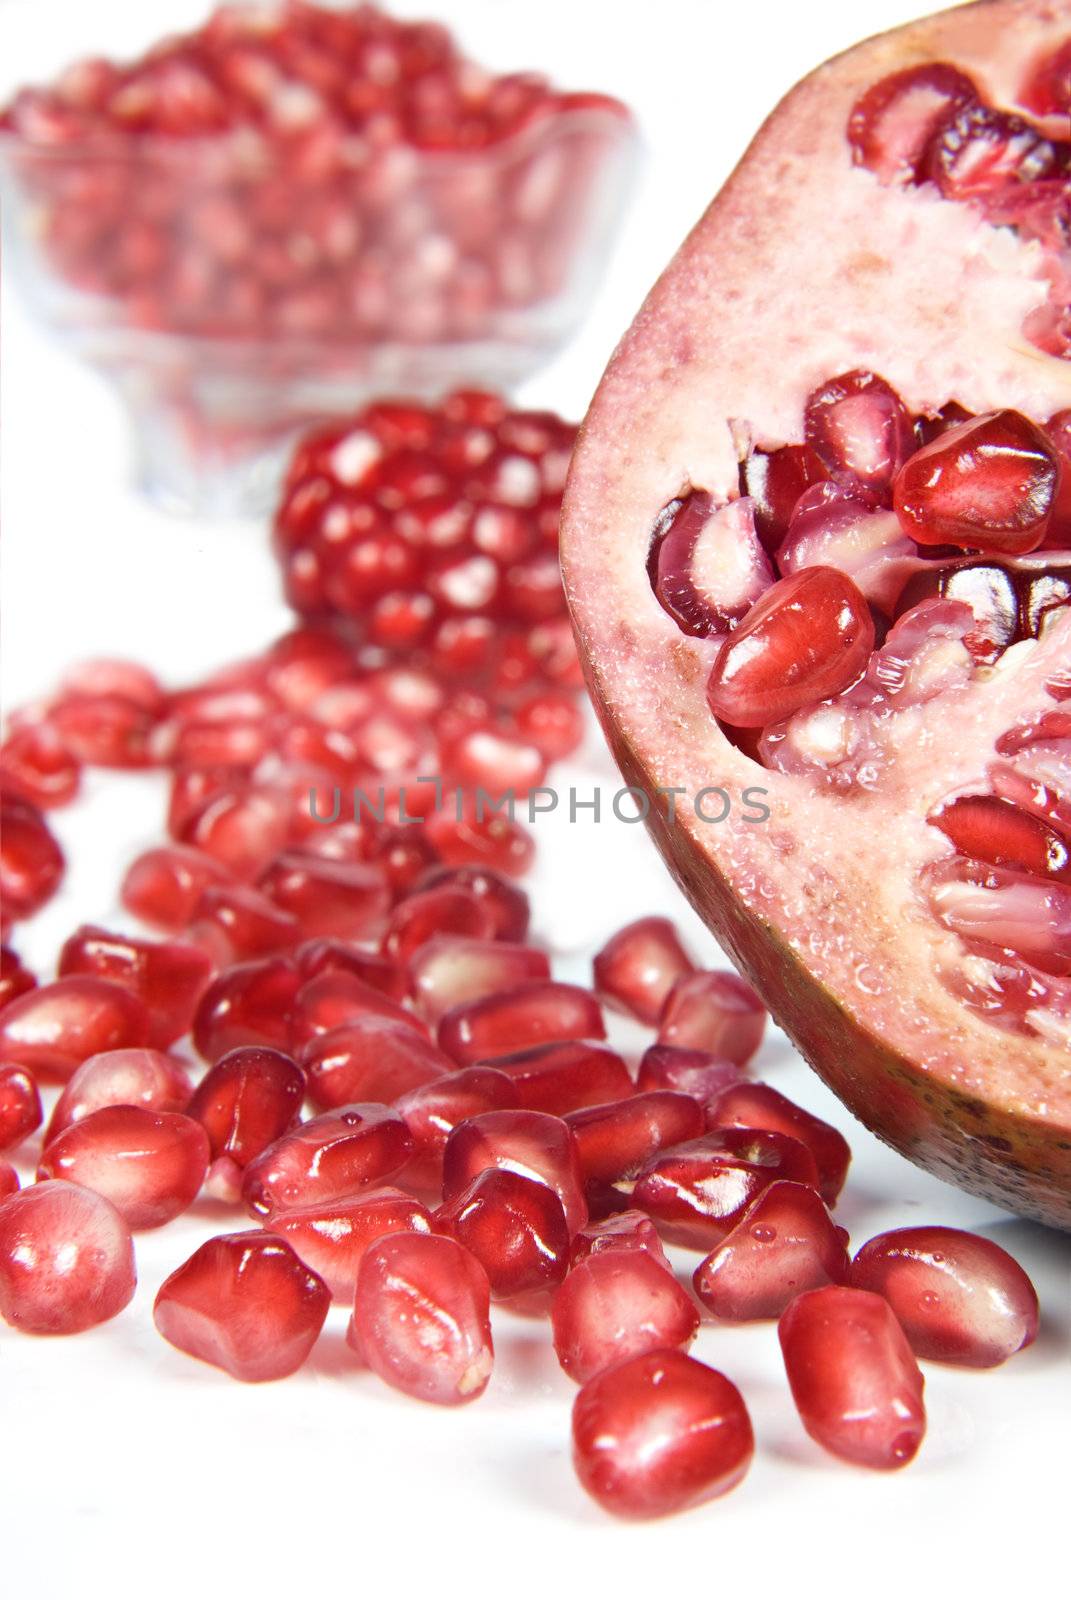 Pomegranate fruit and pips